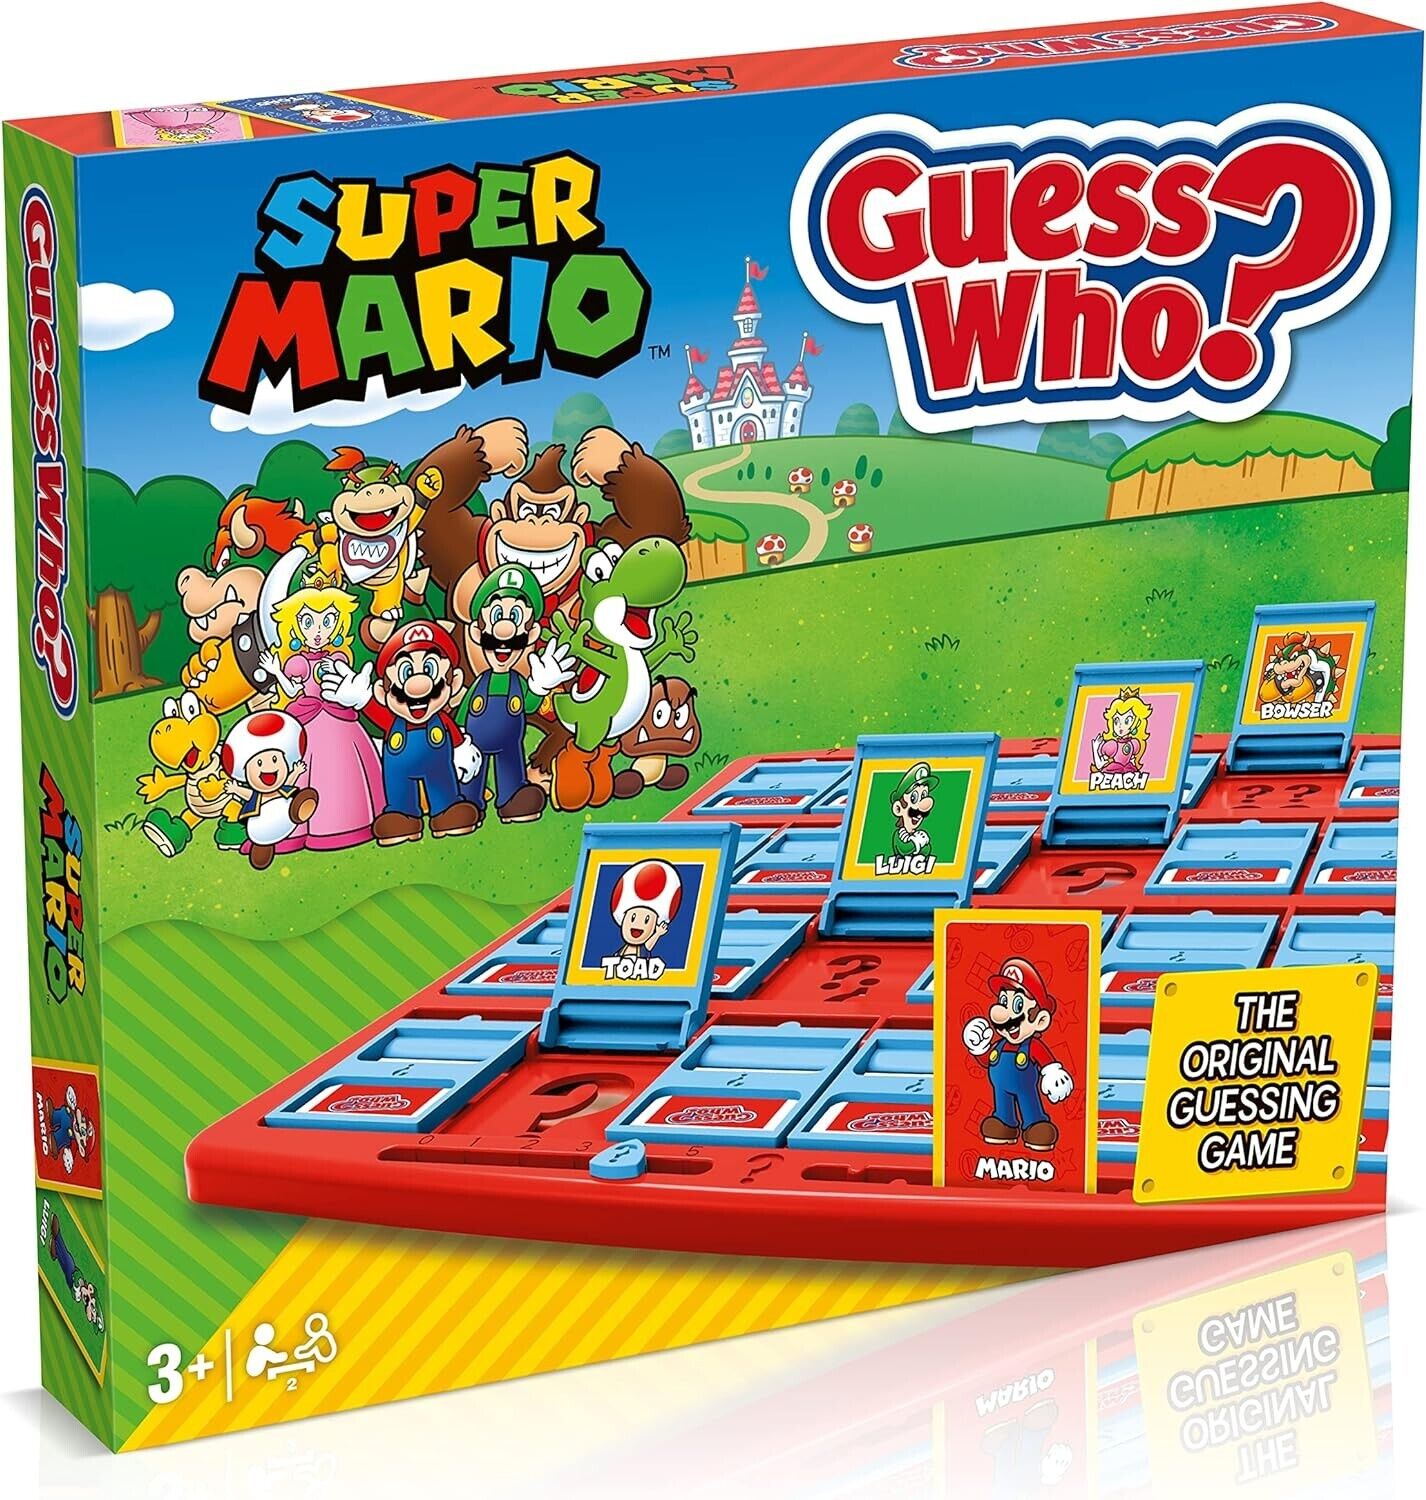 Winning Moves Super Mario Guess Who? Board Game, Play with classic Nintendo char